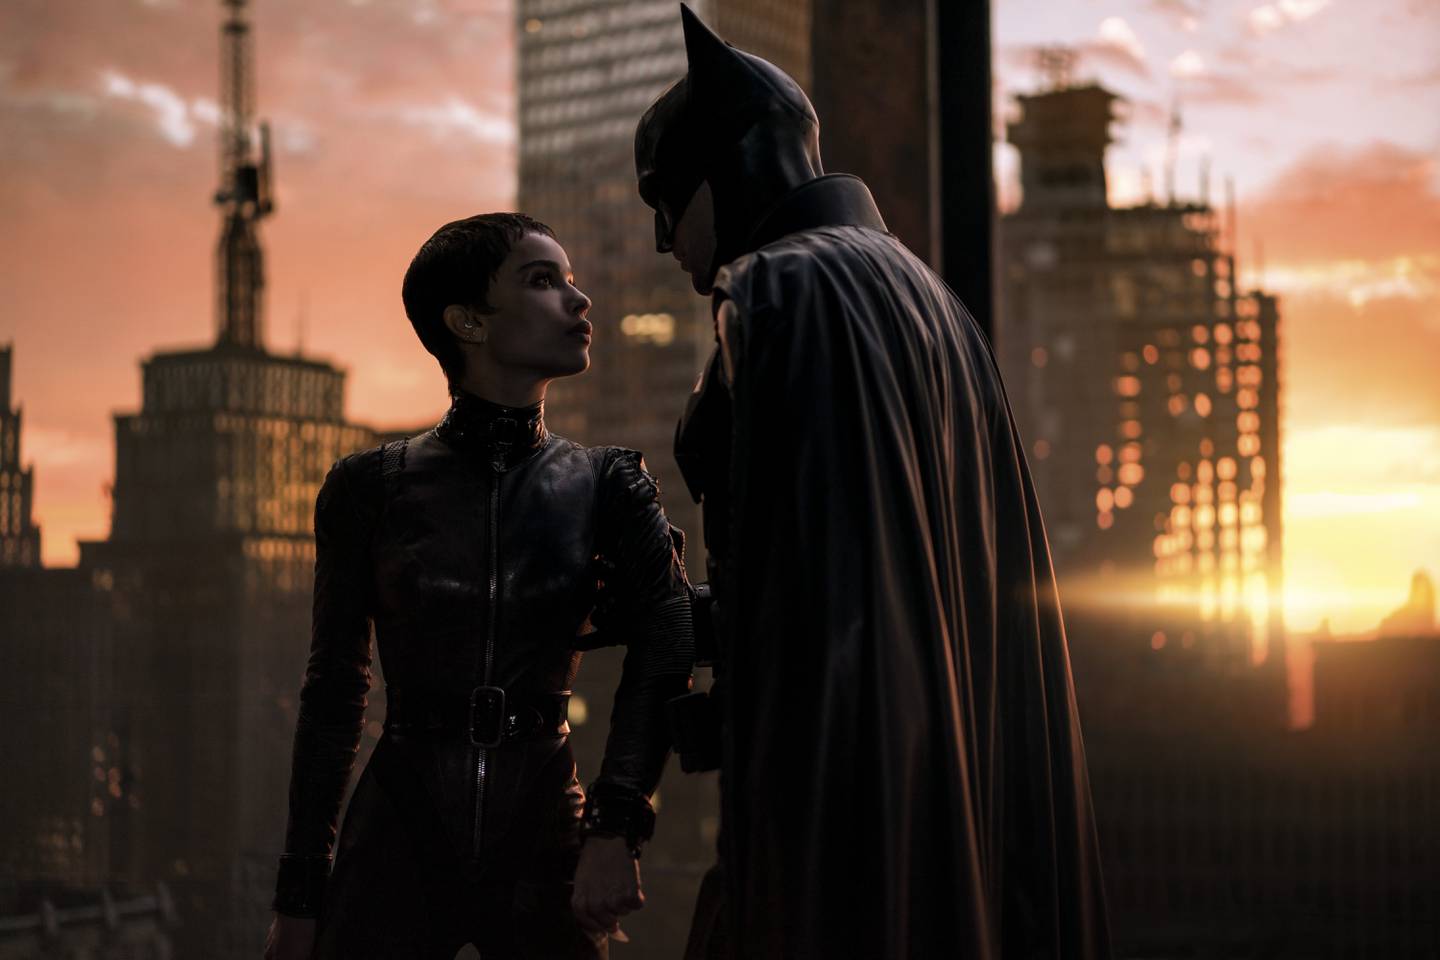 Robert Pattinson's portrayal of Batman breathed new life into a stale franchise. Photo: Warner Bros